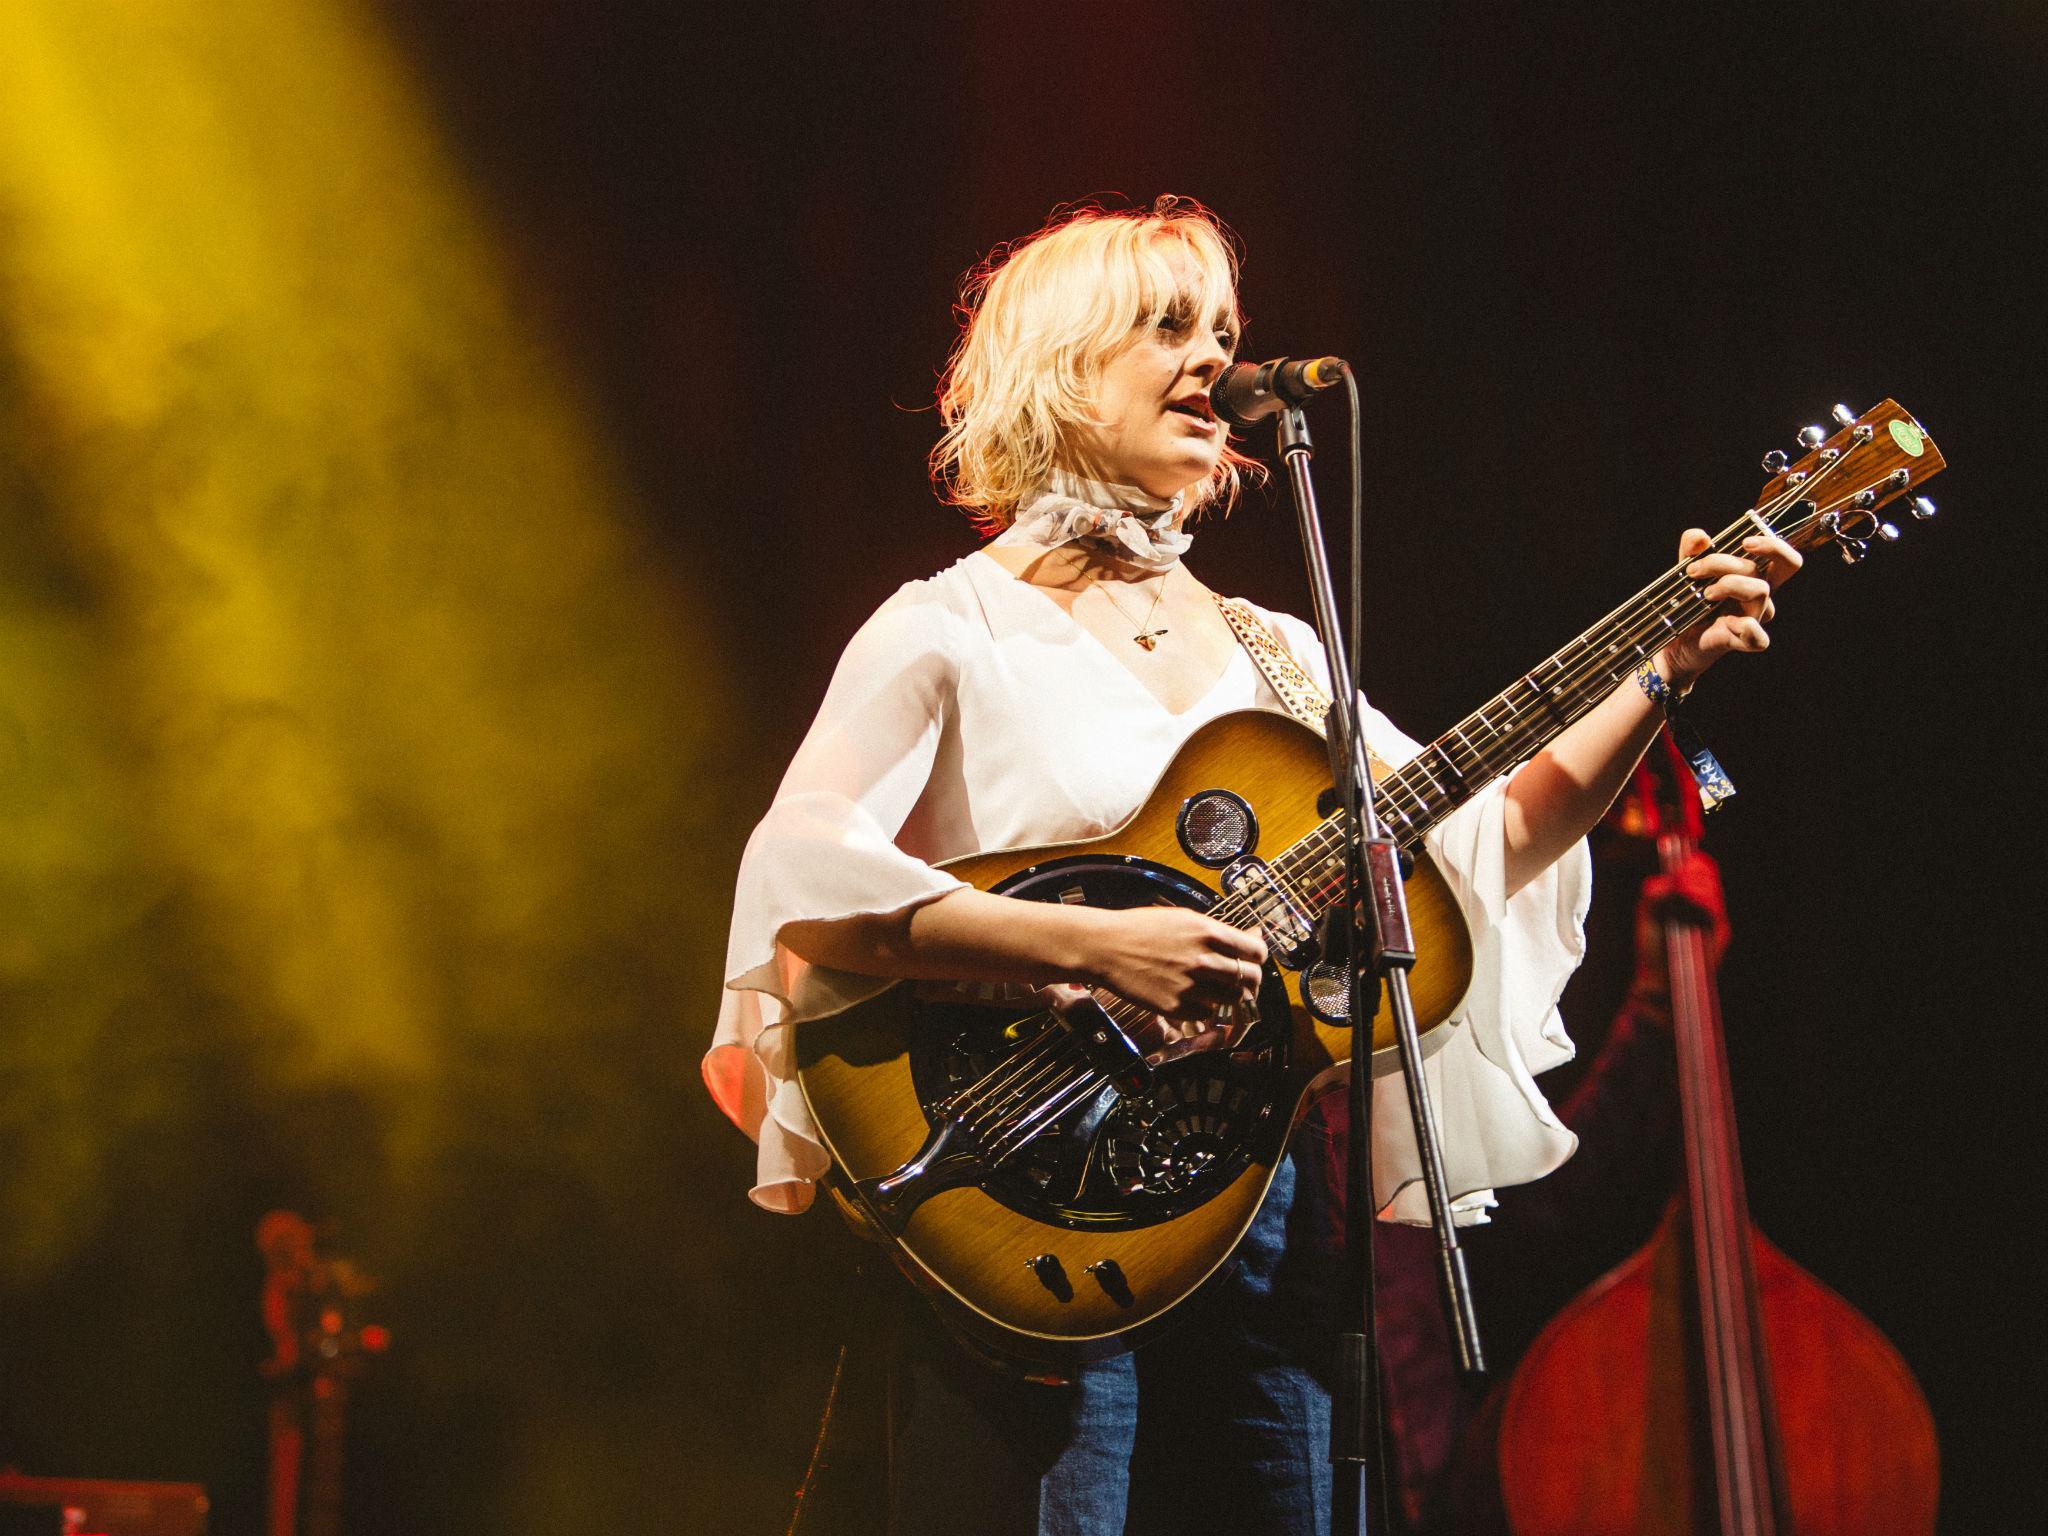 Marling’s west coast summery rock lightened up a festival plagued with gloomy weather